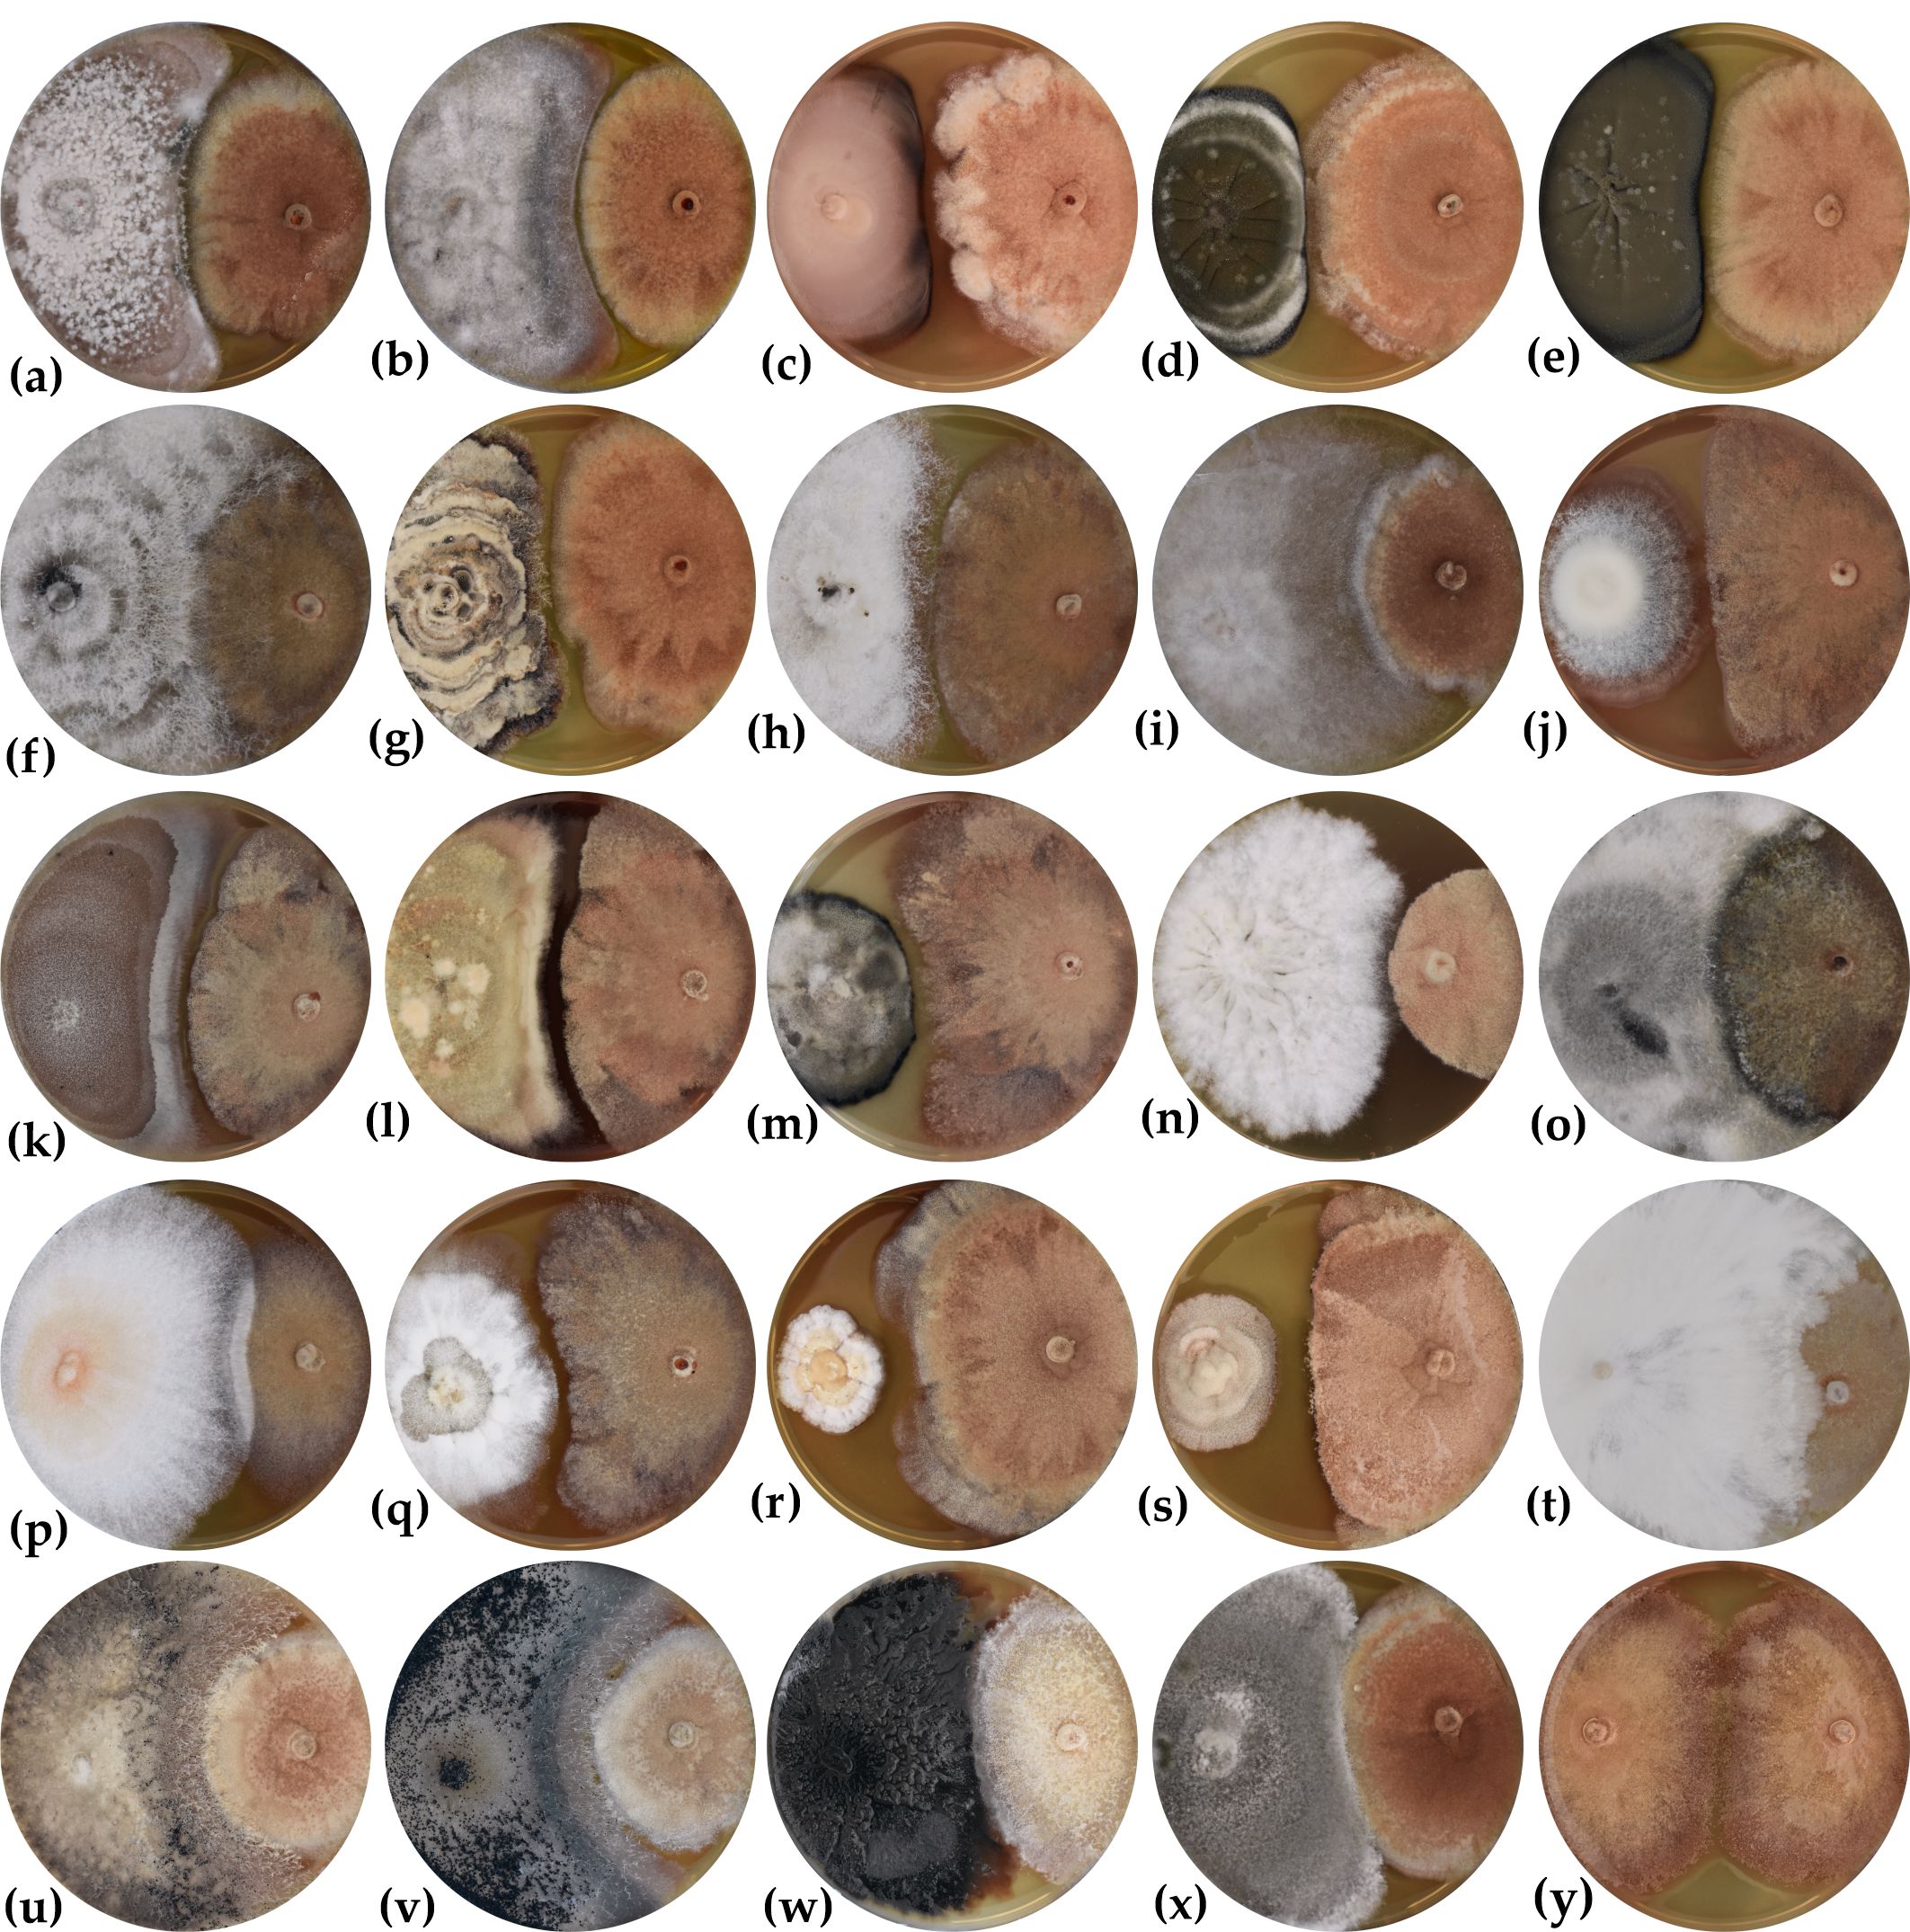 Culturable endophytic fungi in Fraxinus excelsior and their interactions with Hymenoscyphus fraxineus